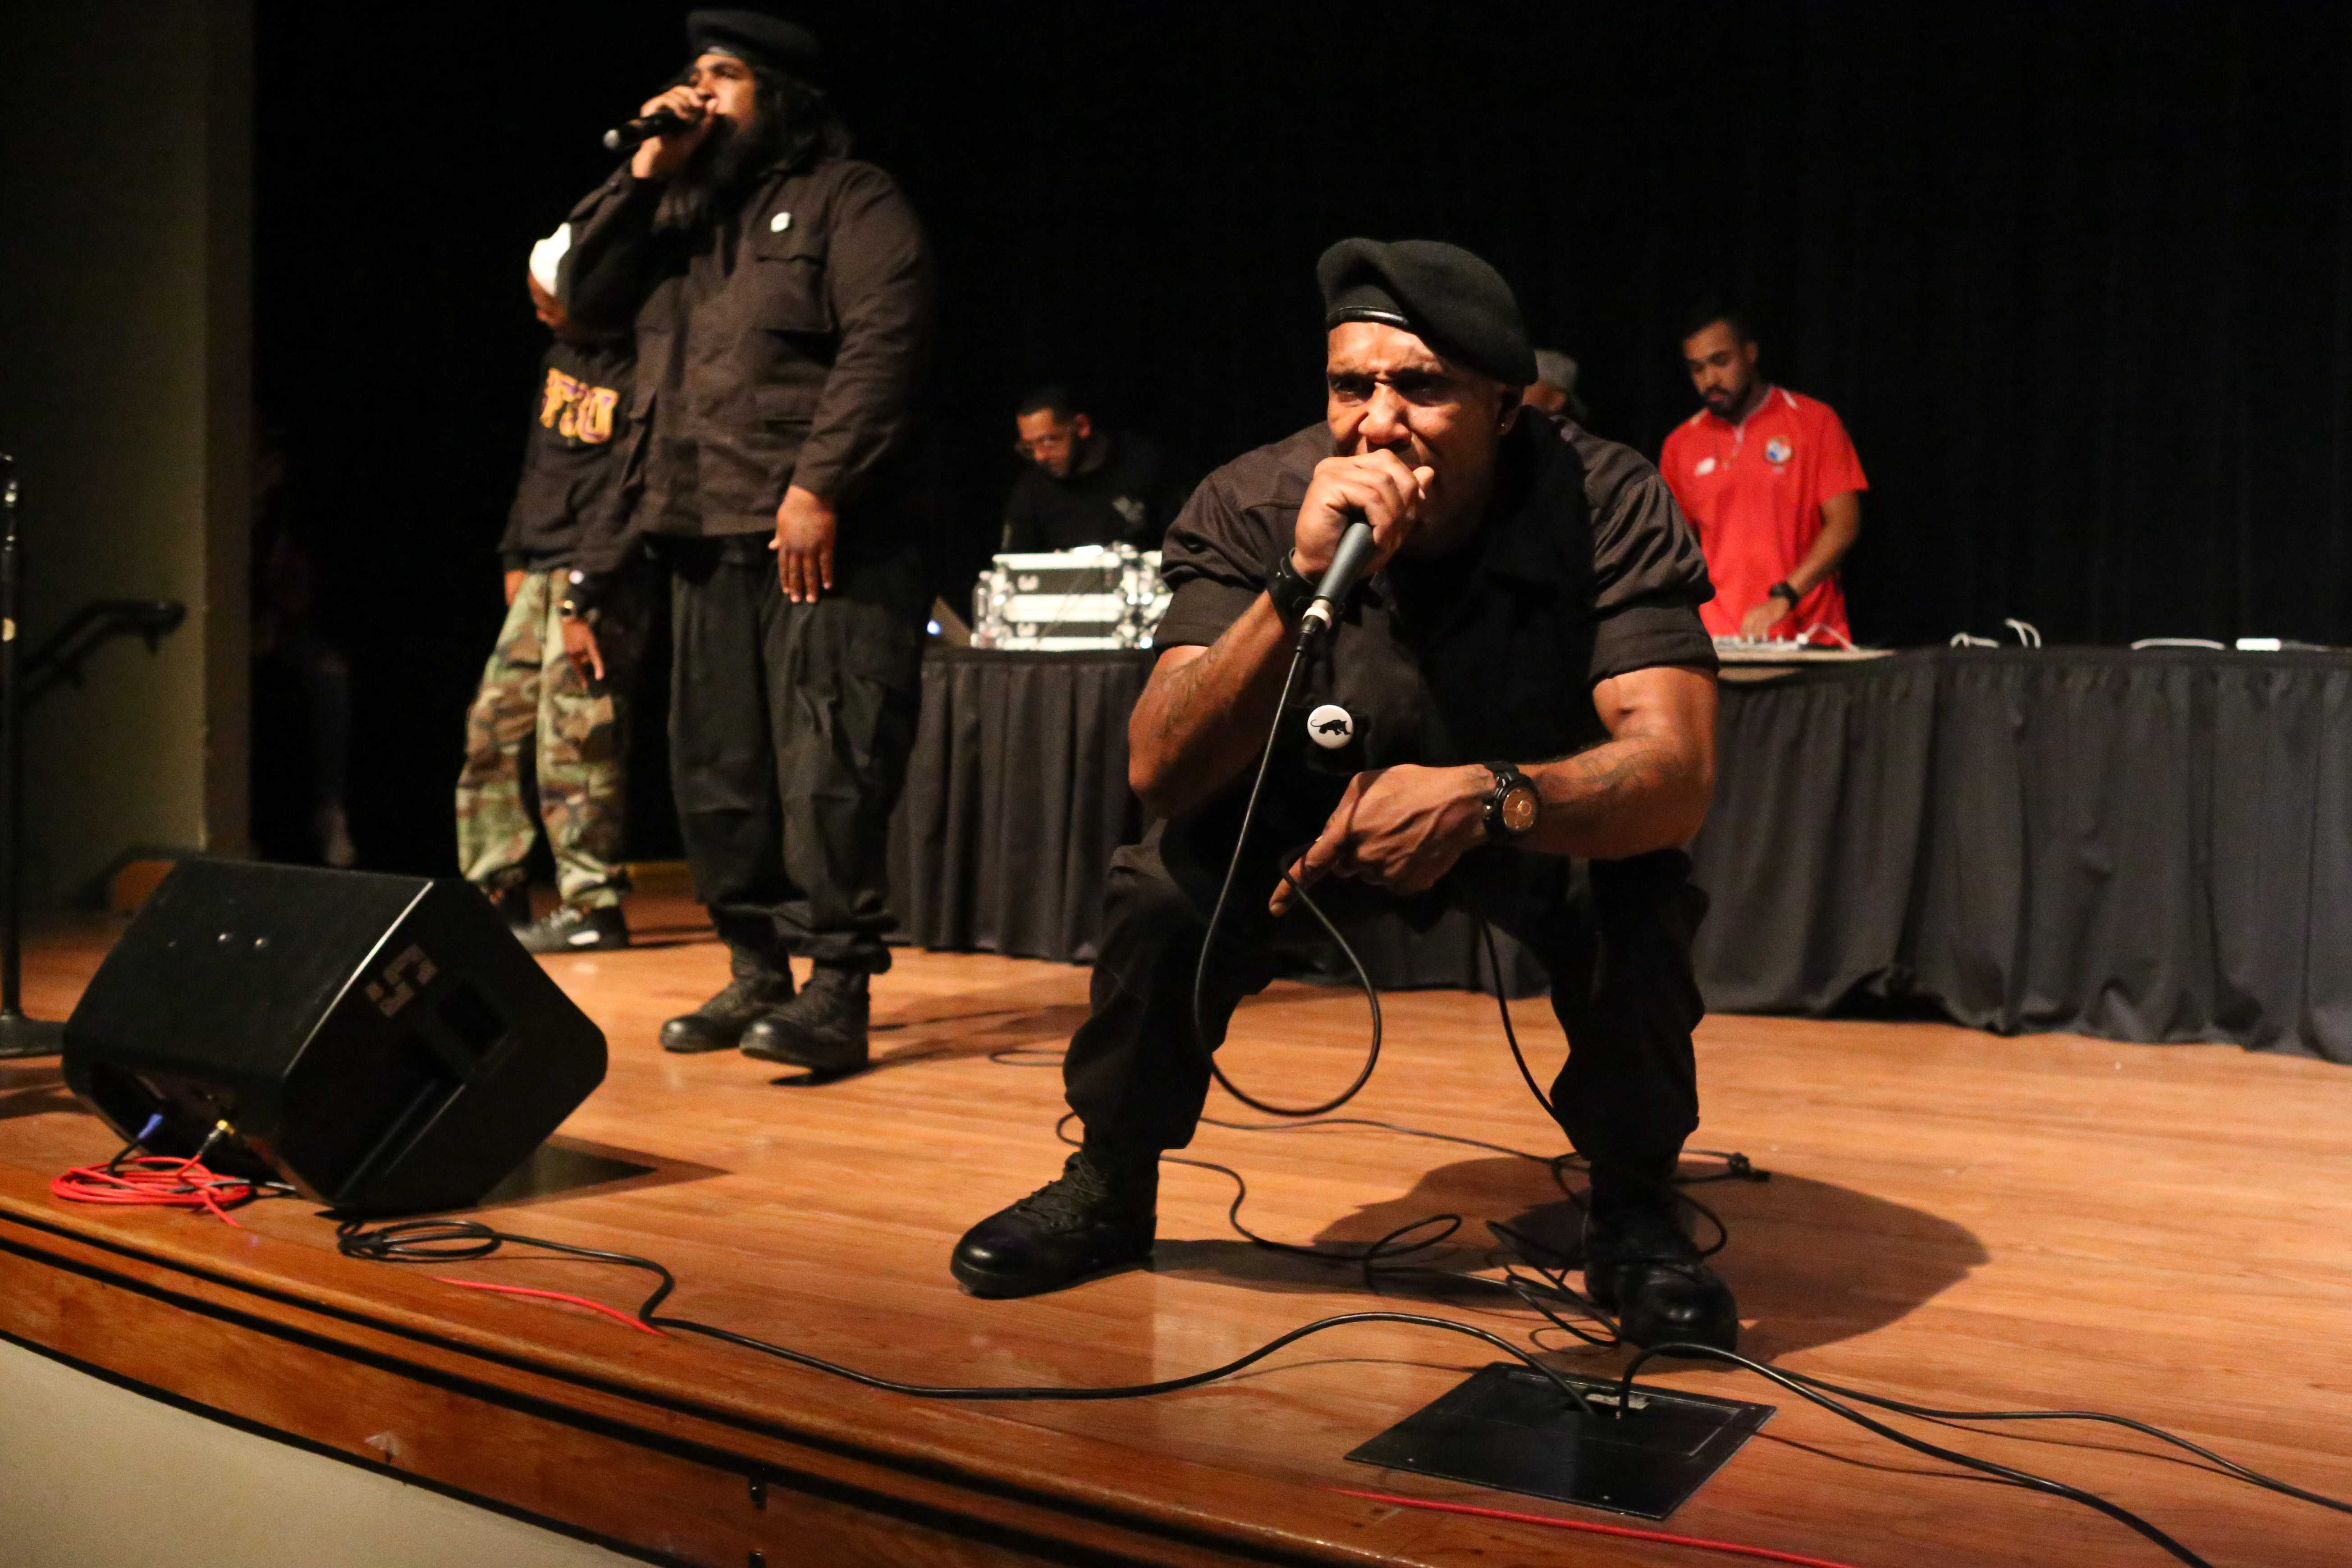 Members of the Black Riders Liberation Party perform at San Francisco State University’s Jack Adams Hall on Thursday, August 30th, 2018. The concert event, put on by Associated Students, took place from 6-9 PM and featured multiple performers. (Mira Laing/Golden Gate Xpress)